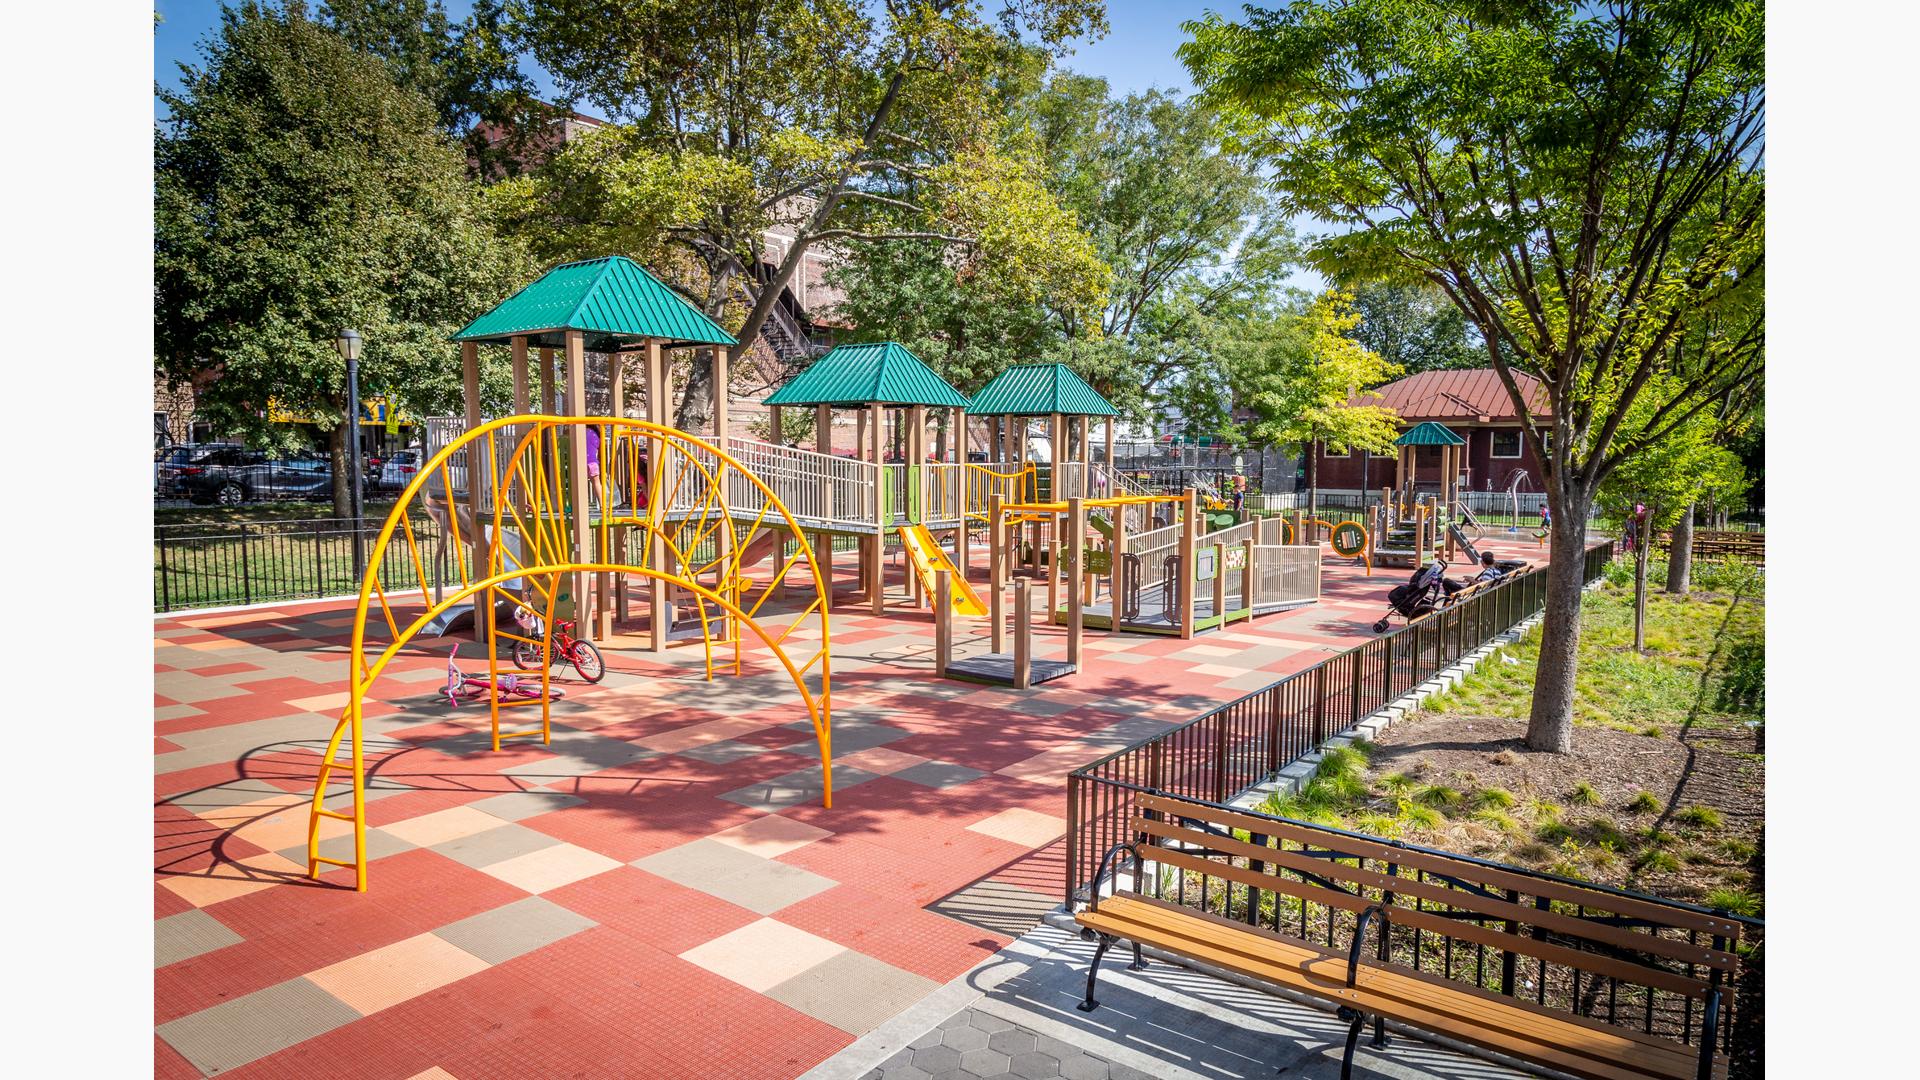 Wheelchair accessible, ramped playground structure with three green roofs and yellow climbers.